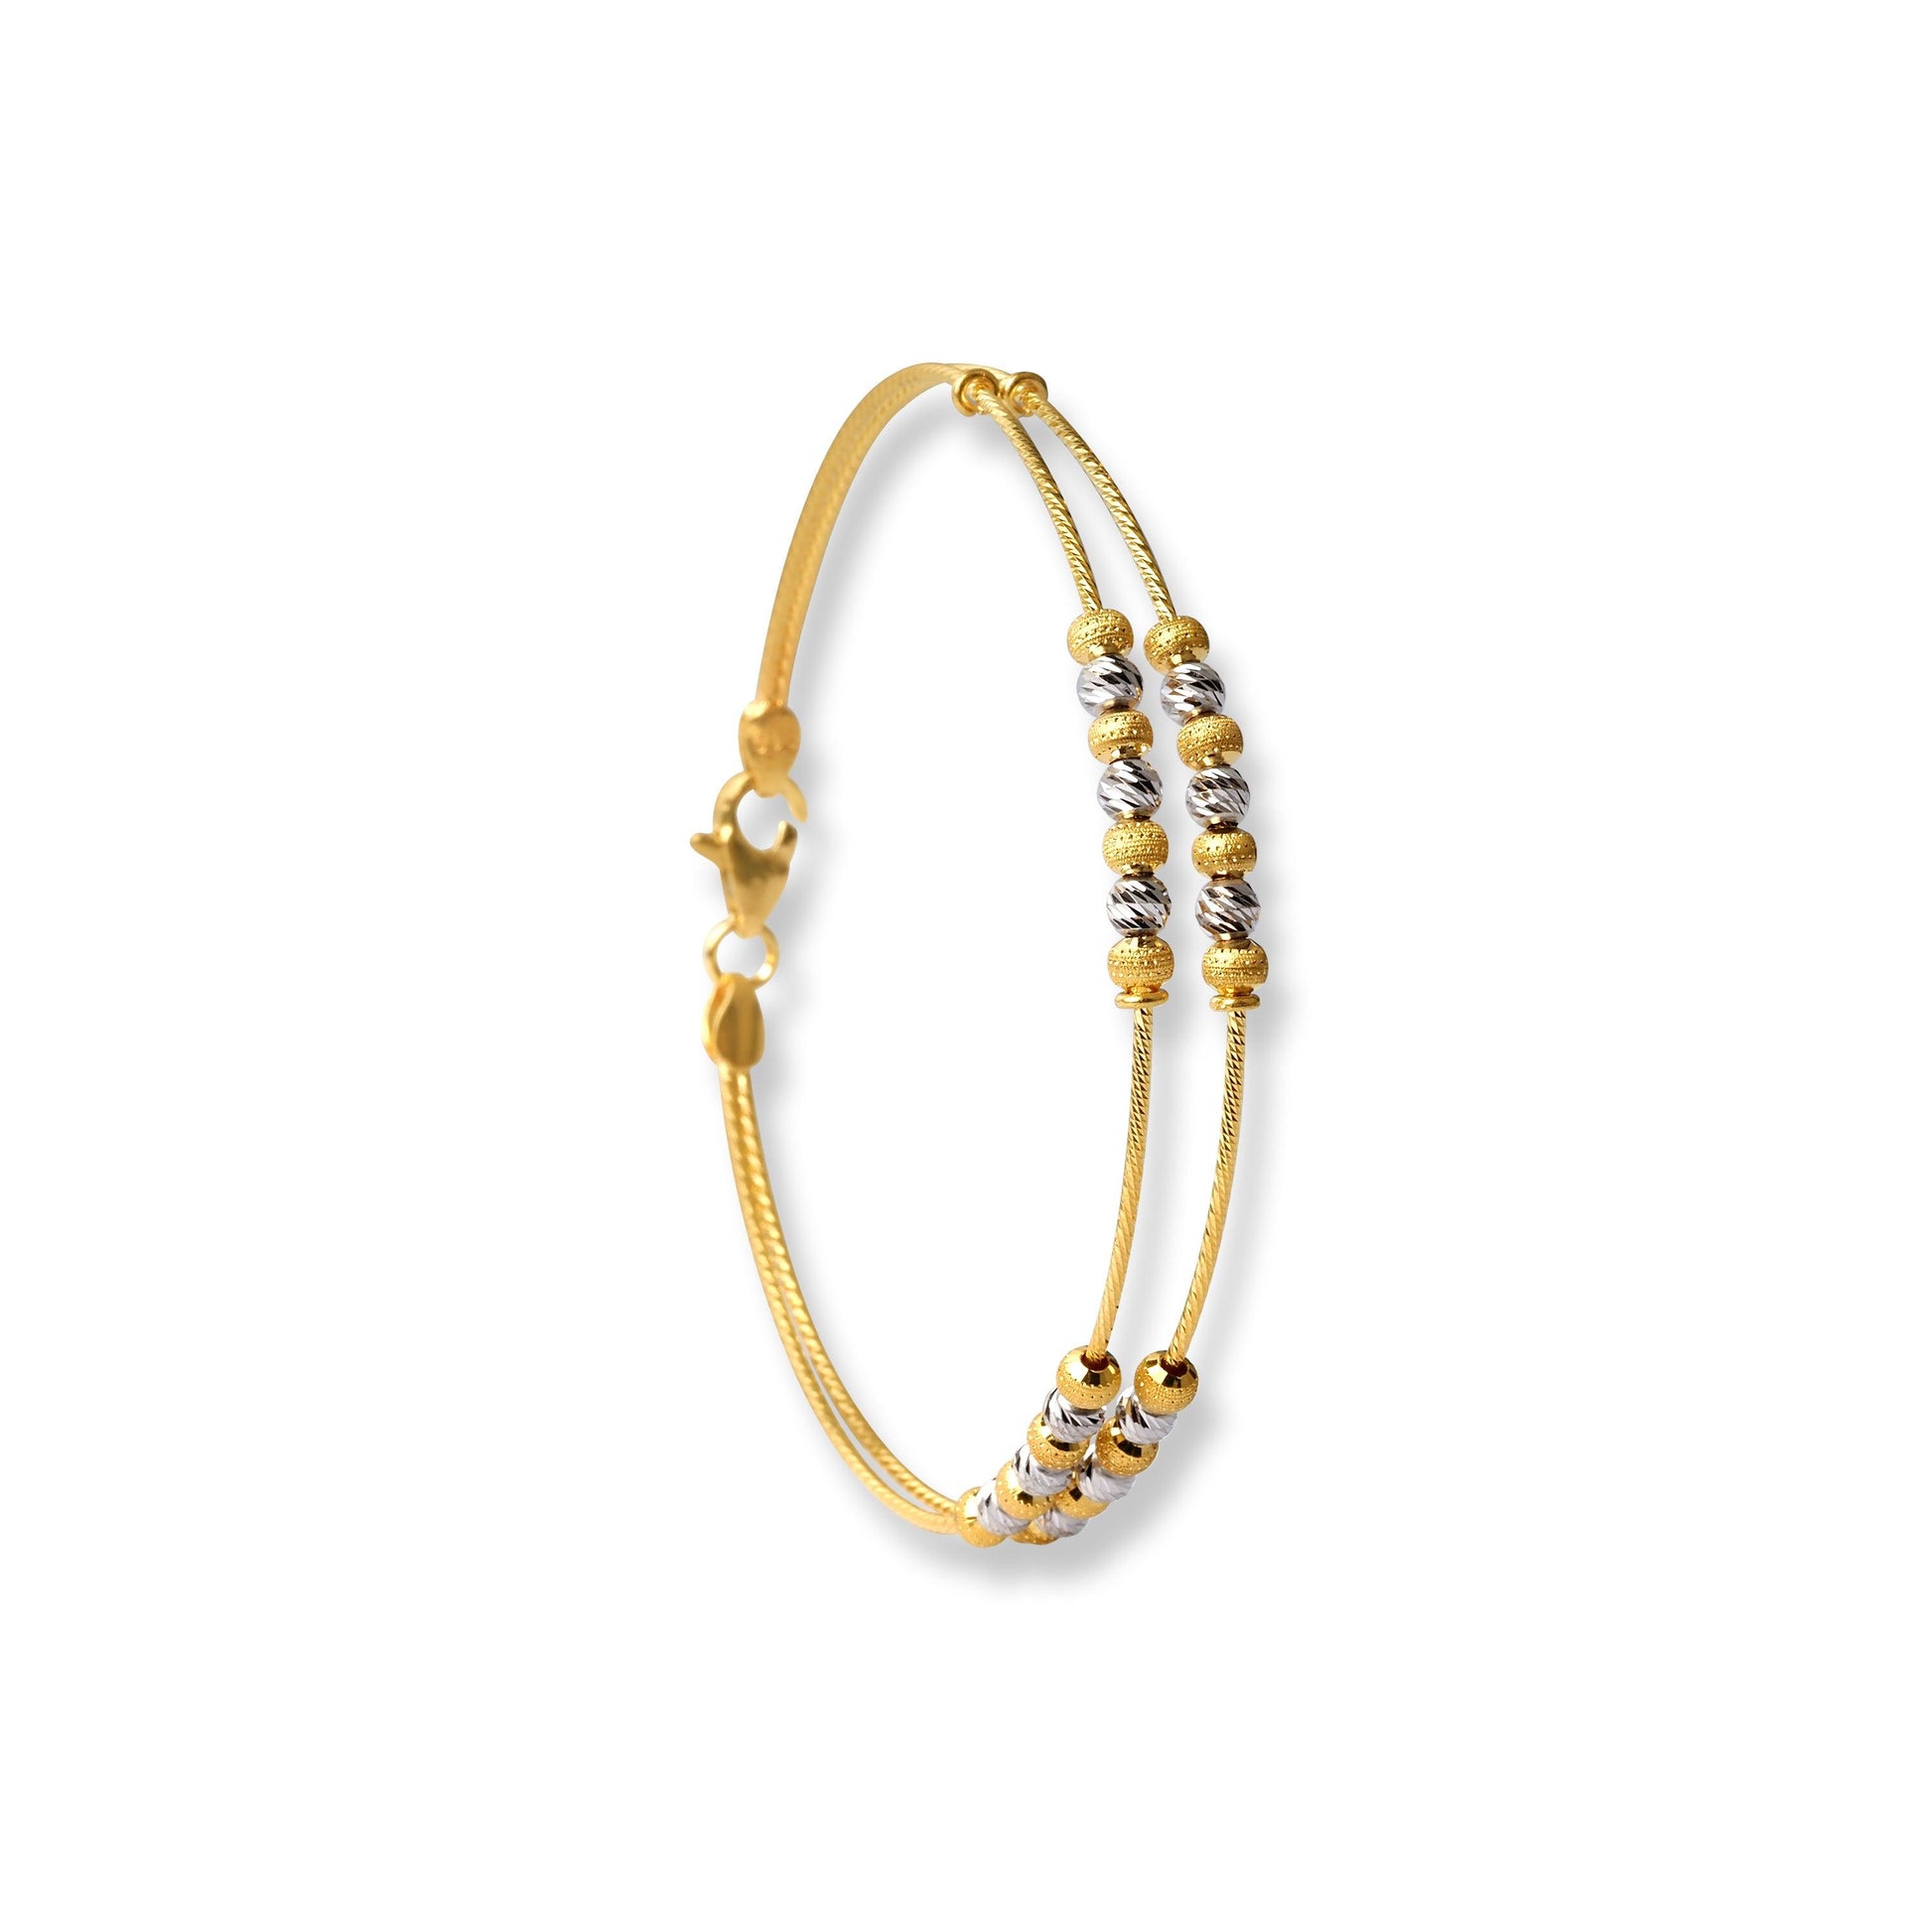 22ct Gold Rhodium Plated Beads Bangle With Rounded Trigger Clasp (7.2g) B-8445 - Minar Jewellers